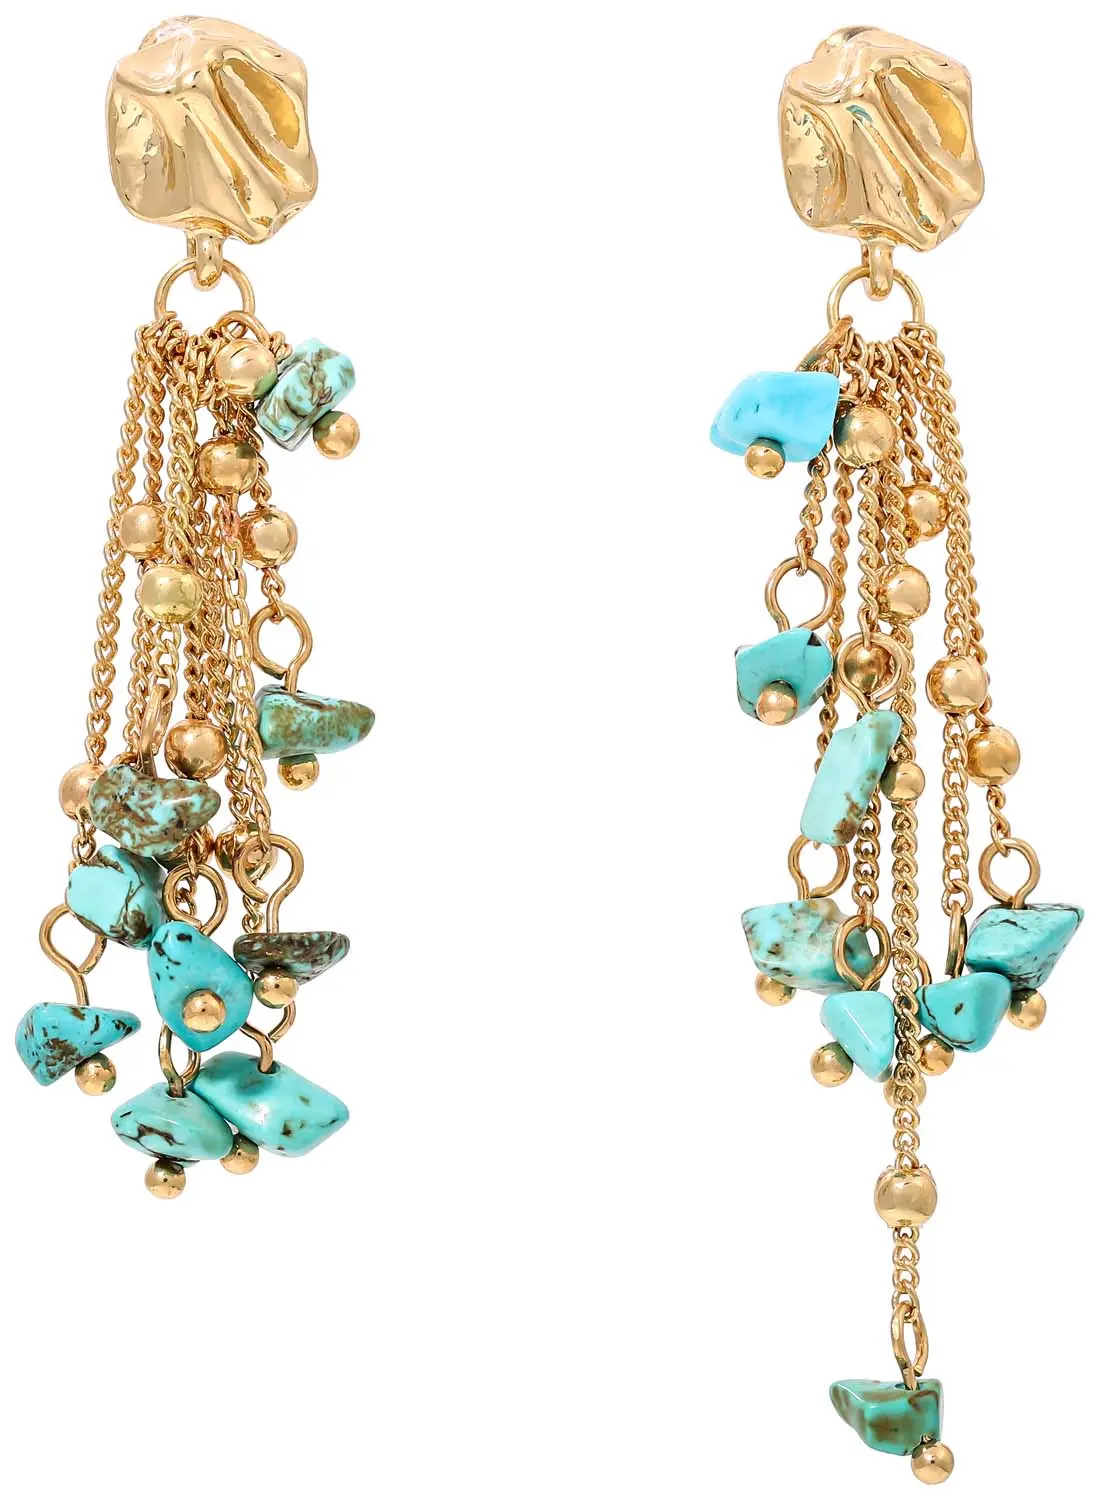 Boucles d’oreilles - Turquoise Waterfall